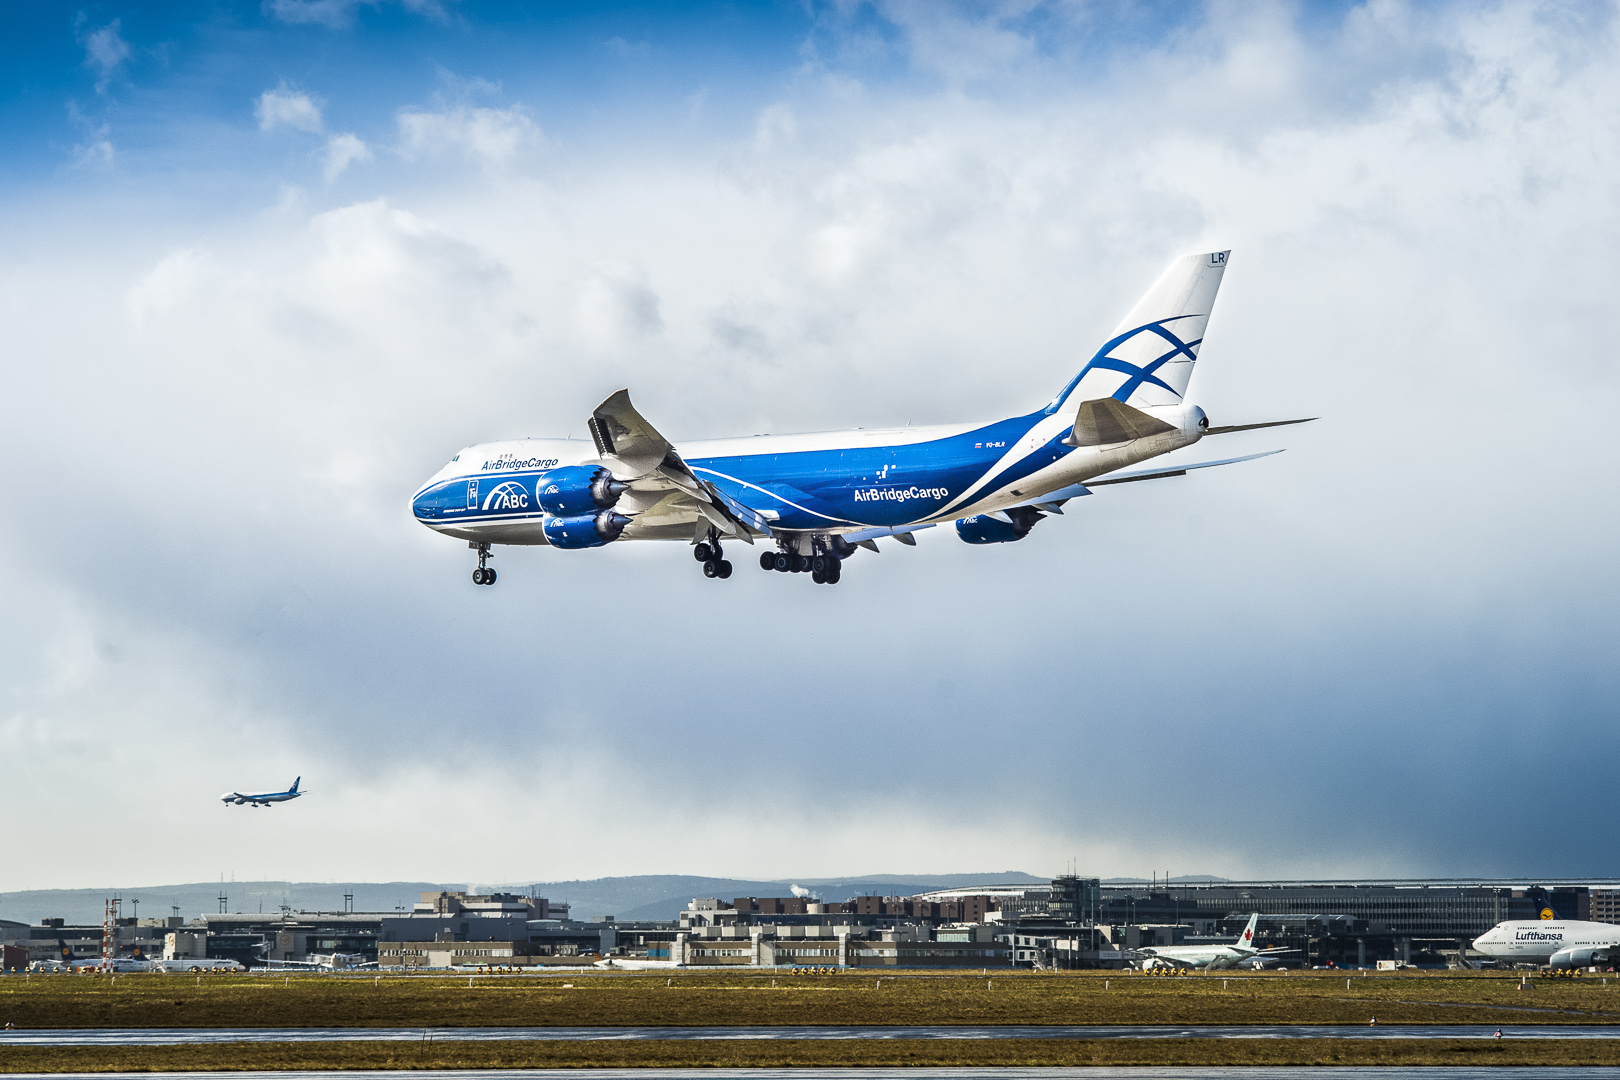 AirBridgeCargo to reach significant records in Europe